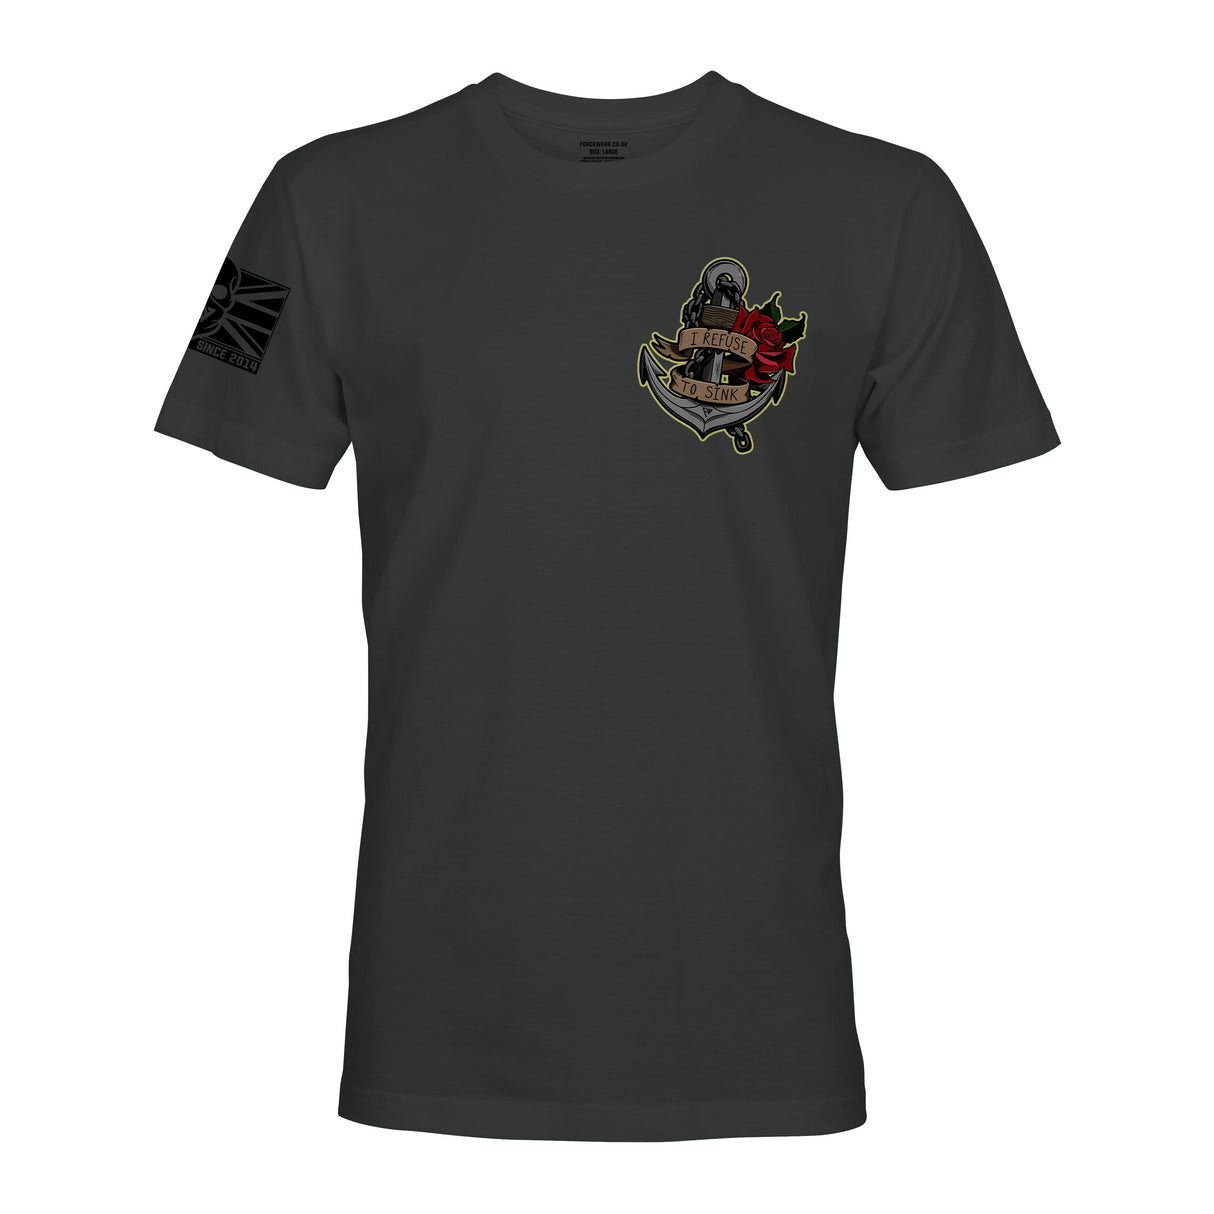 I REFUSE TO SINK - Force Wear HQ - T-SHIRTS